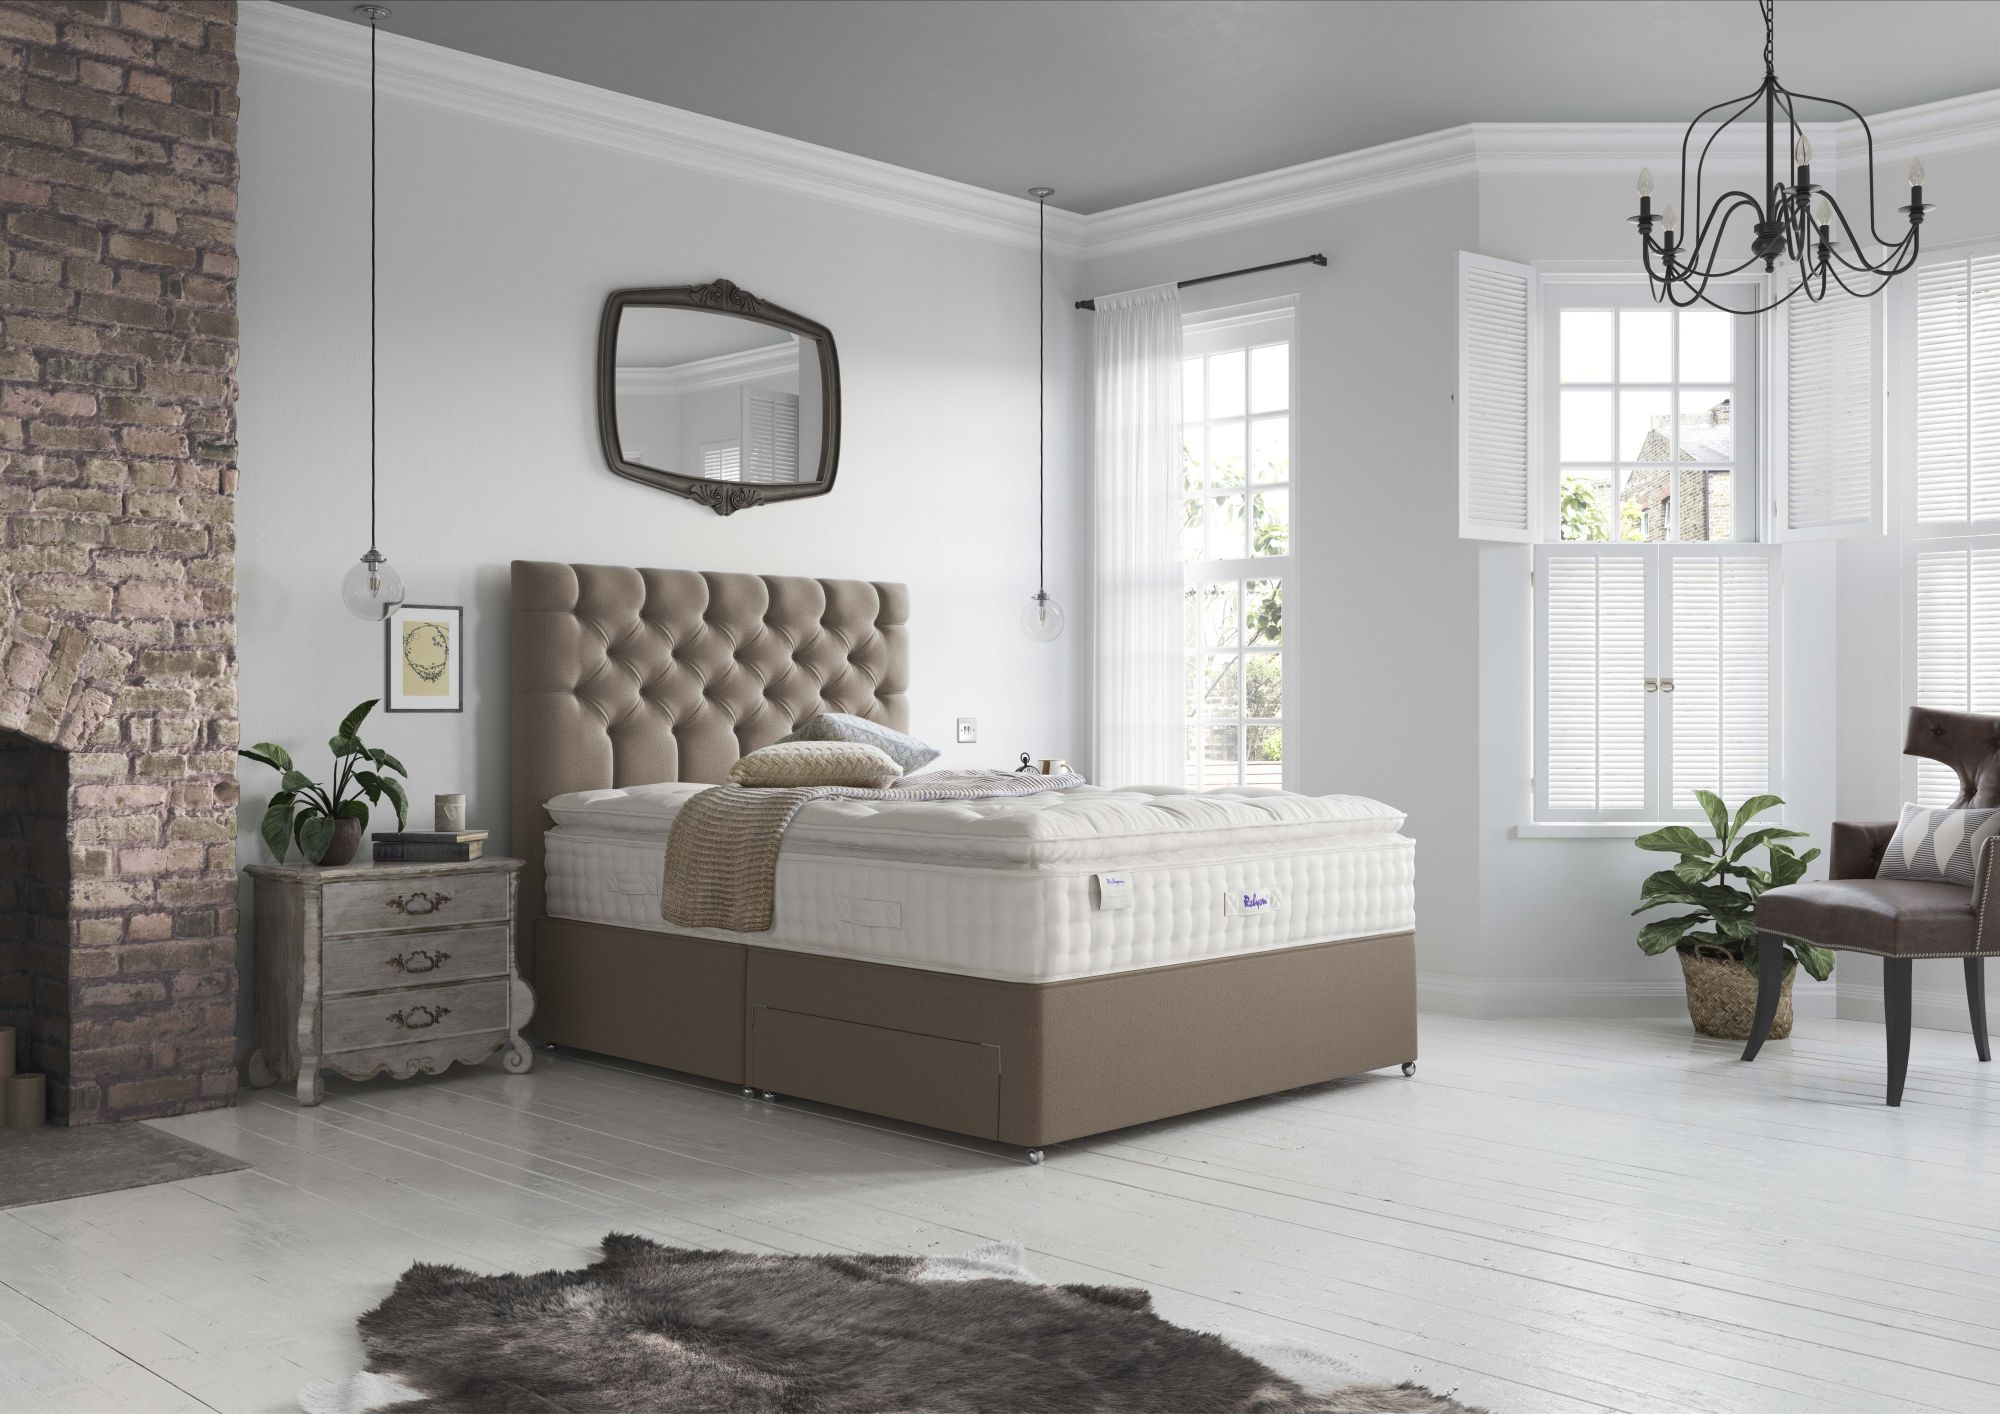 Relyon Luxury Silk 2850 Bed